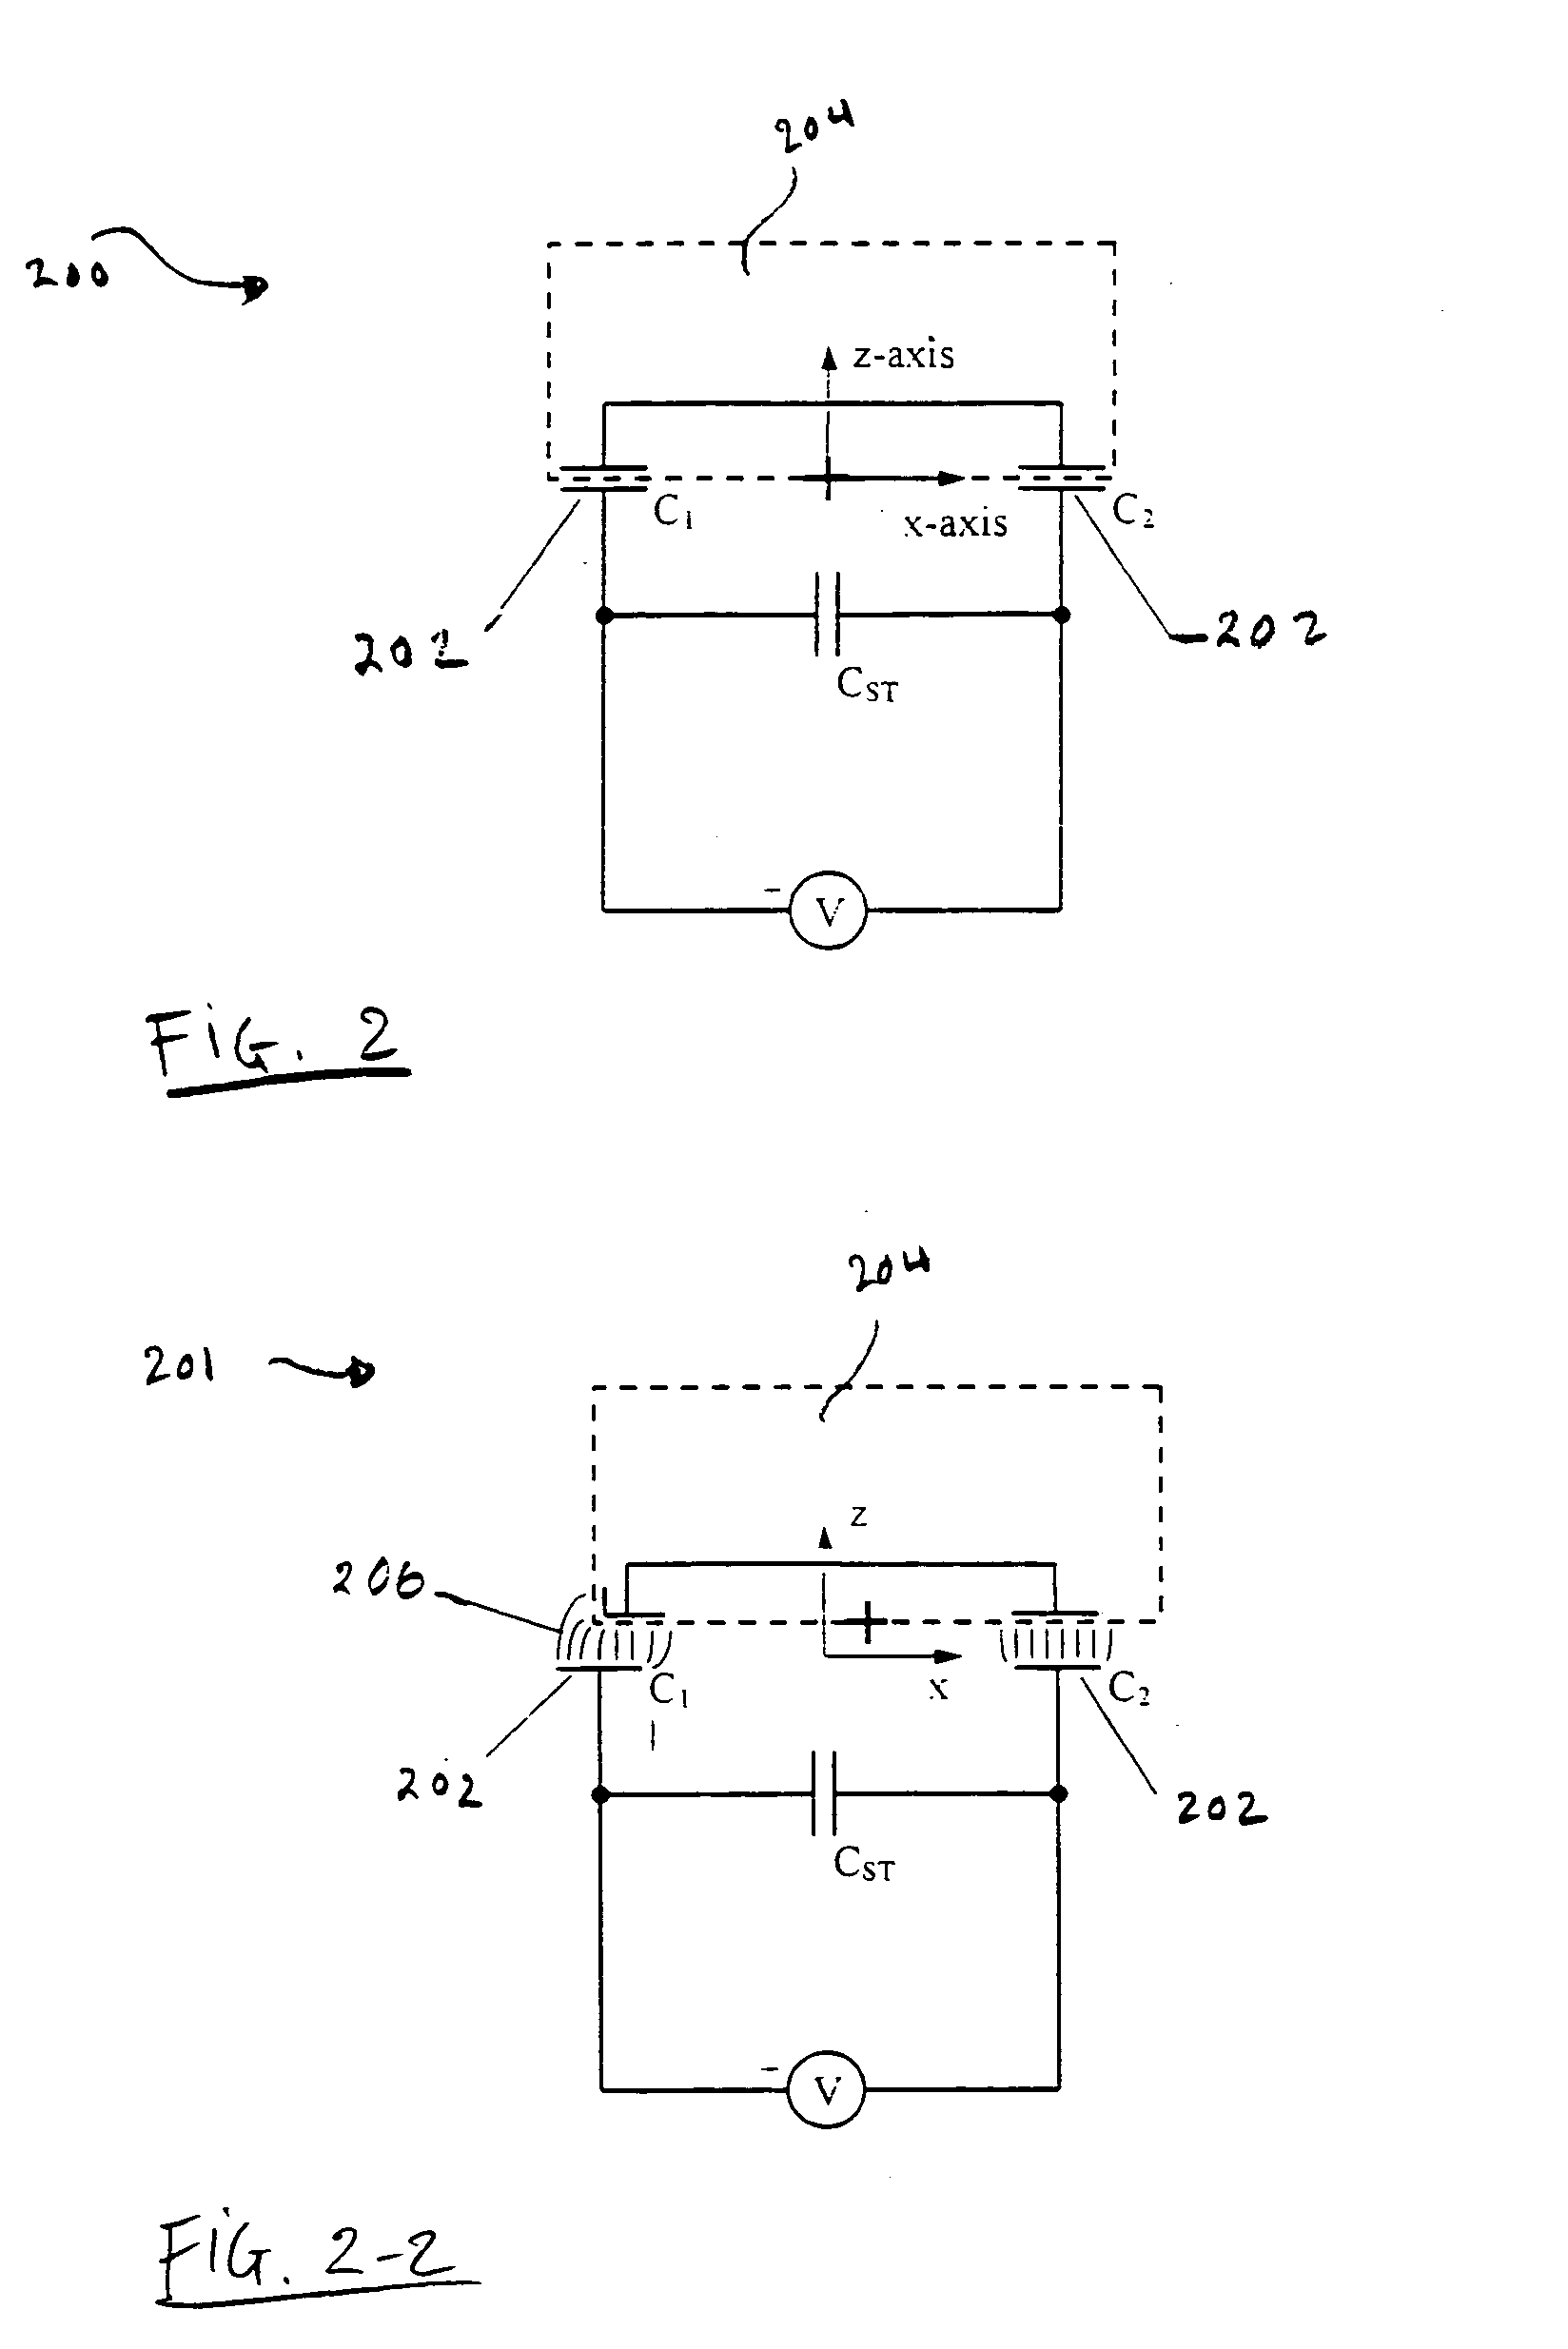 Method and apparatus for self-assembly of functional blocks on a substrate facilitated by electrode pairs